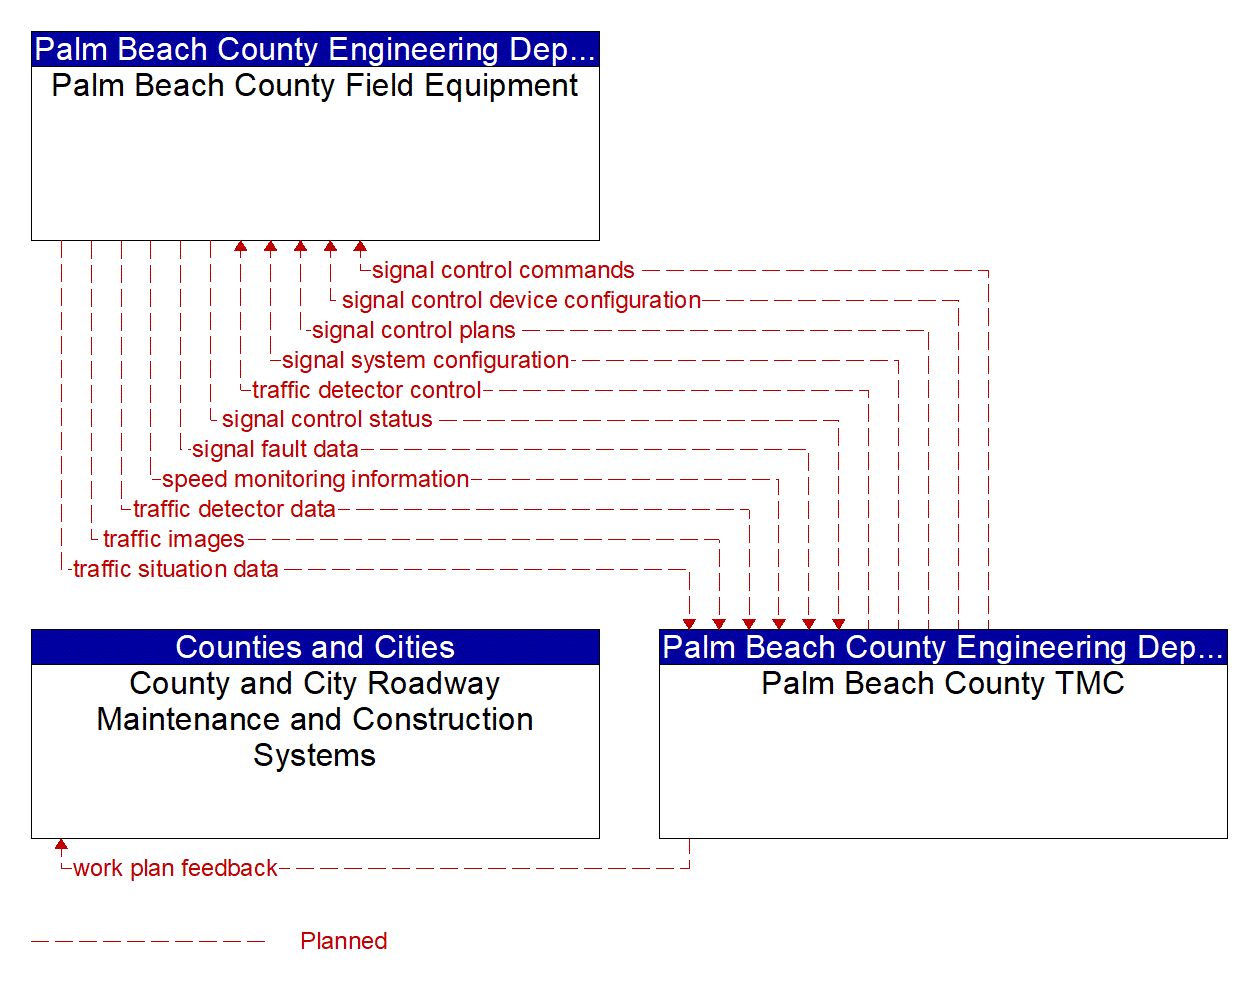 Project Information Flow Diagram: Palm Beach County Engineering Department